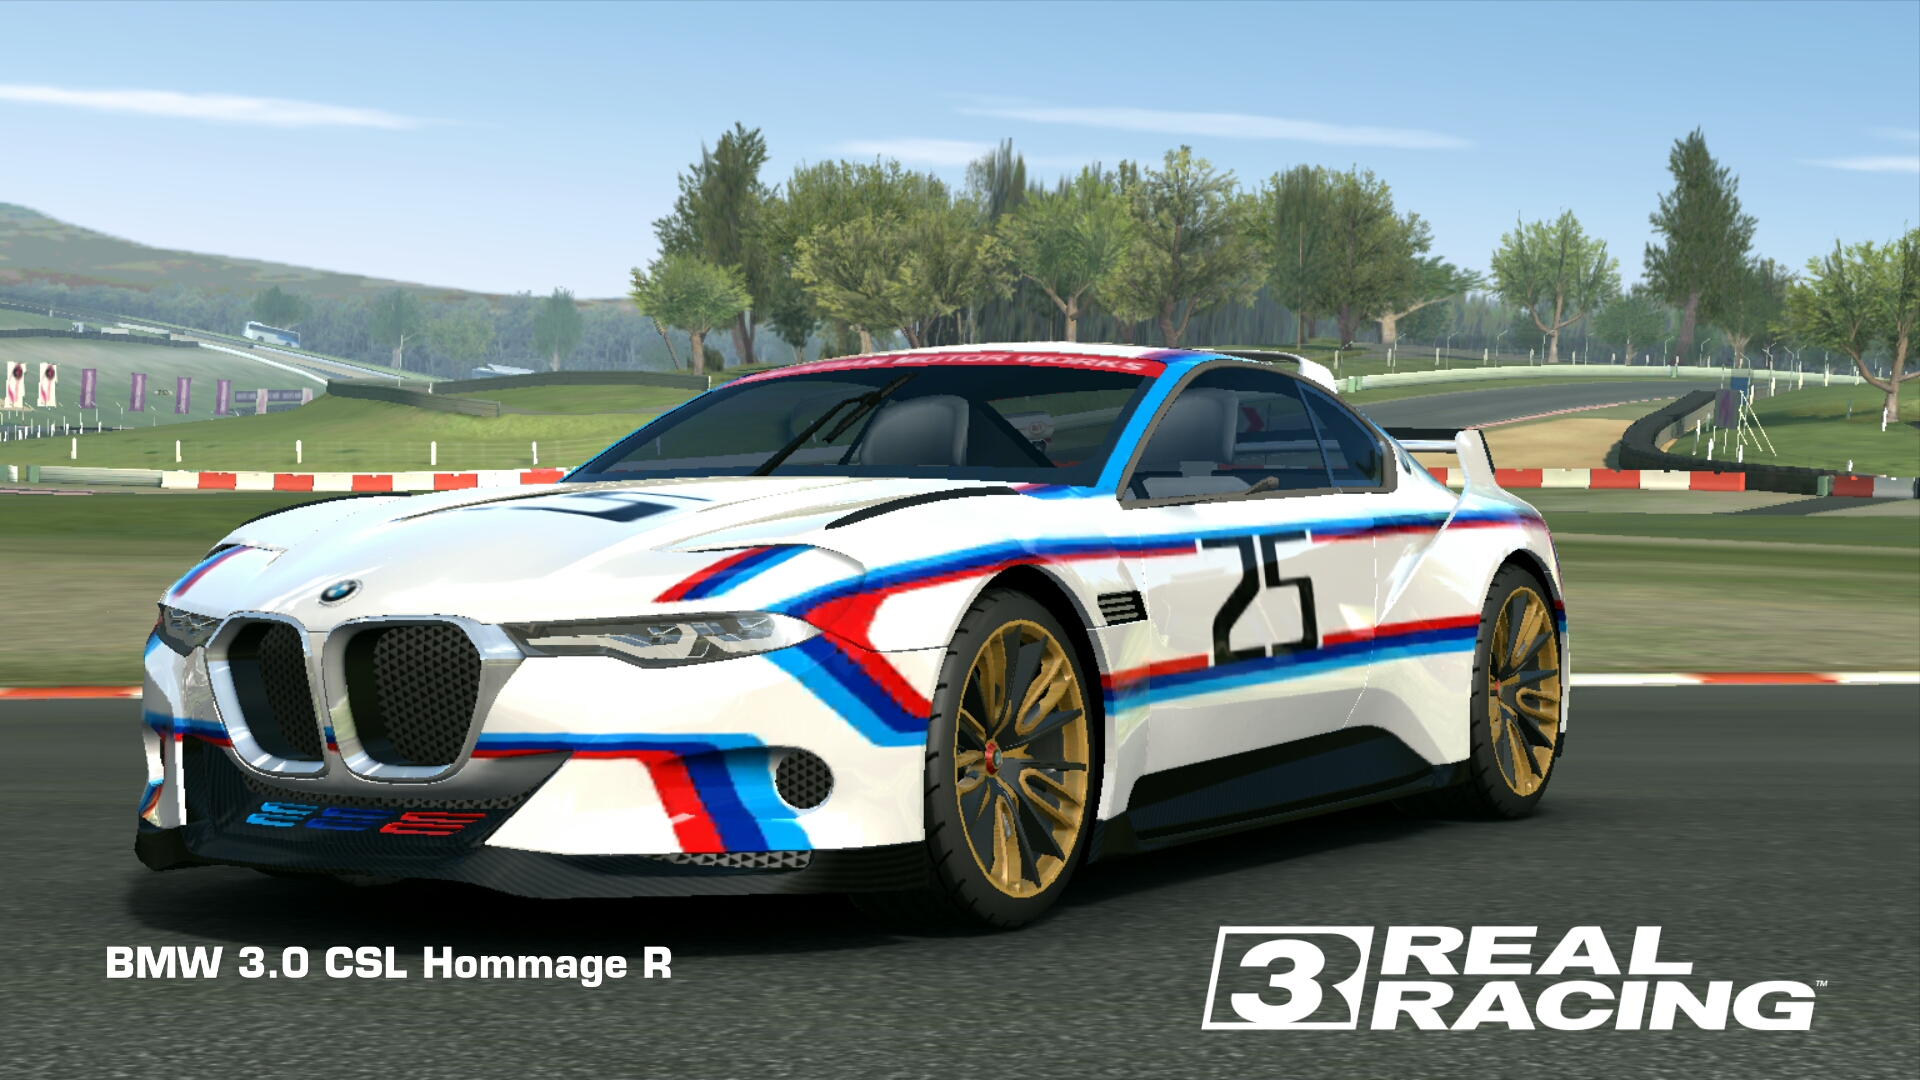 BMW 30 CSL Hommage R Real Racing 3 Wiki FANDOM Powered By Wikia